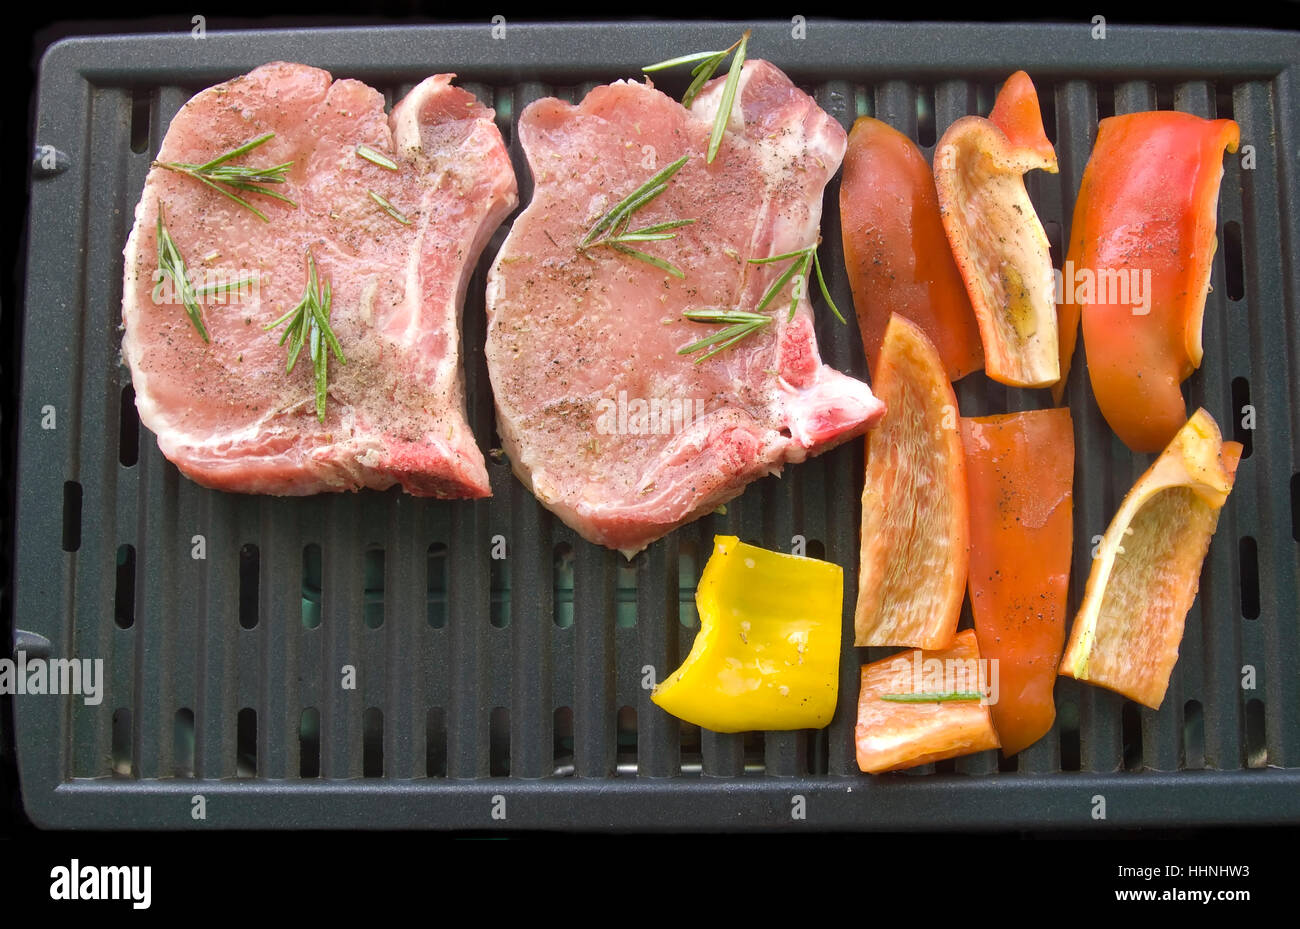 grill, barbecue, barbeque, fastfood, meat, summer, summerly, hot, grill, Stock Photo